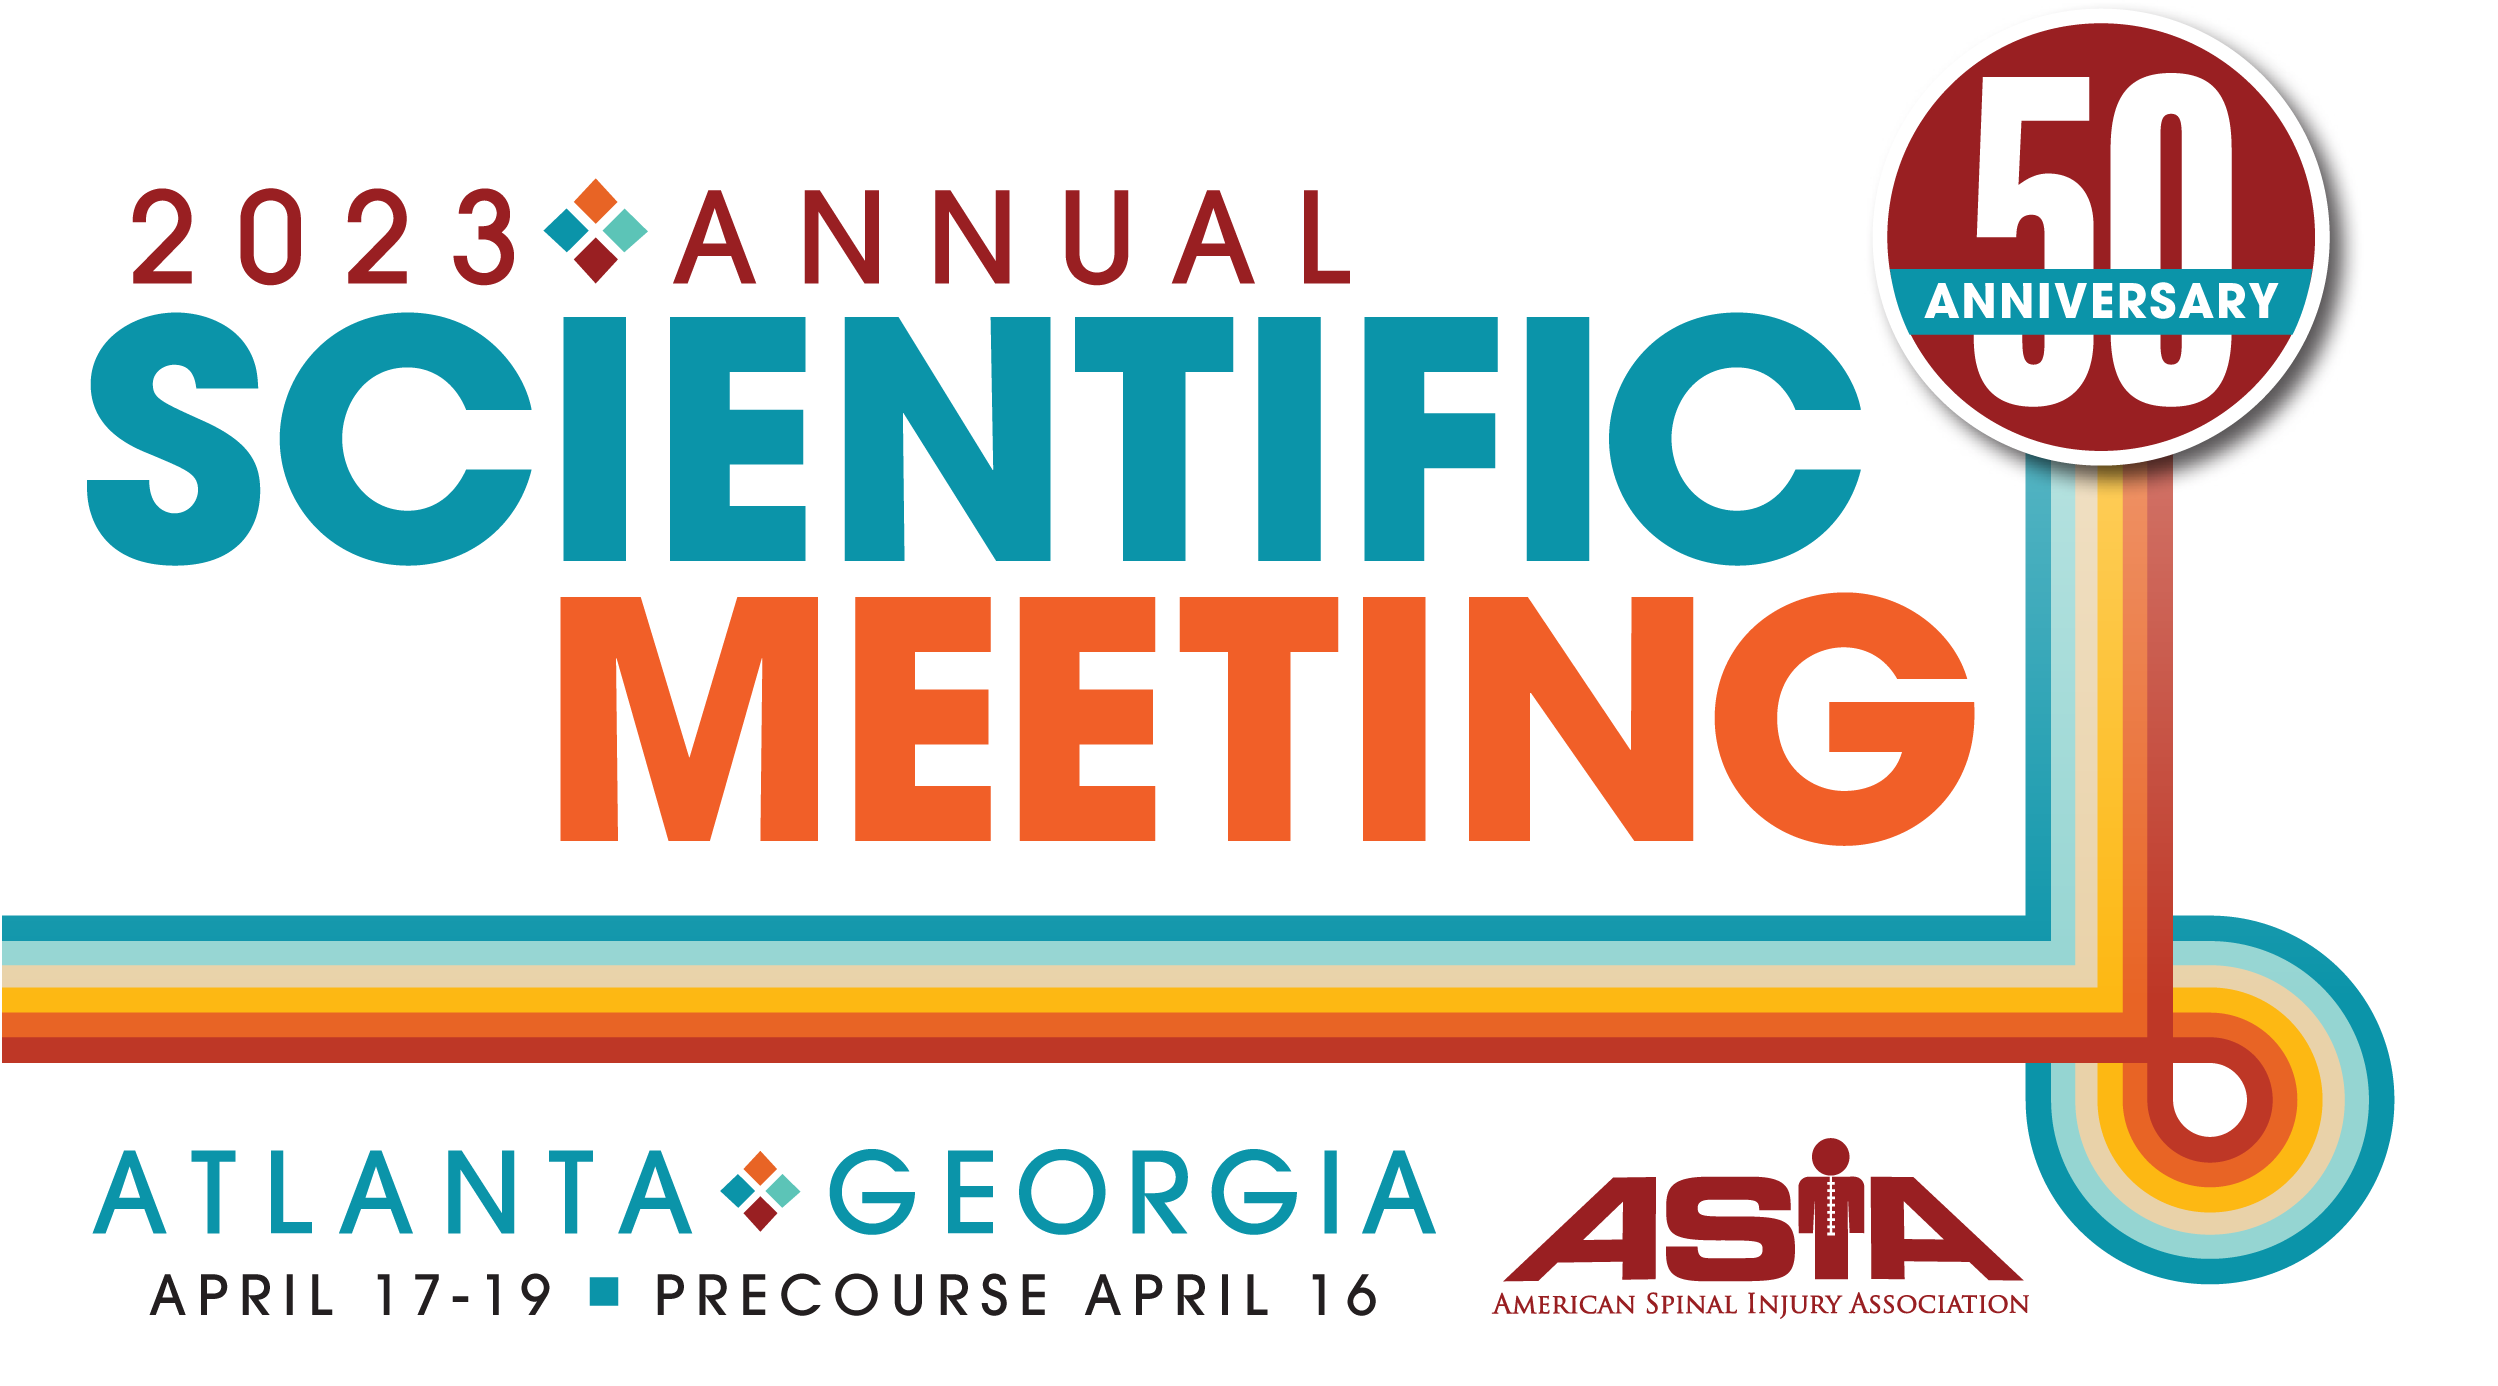 2023 Annual Scientific Meeting American Spinal Injury Association